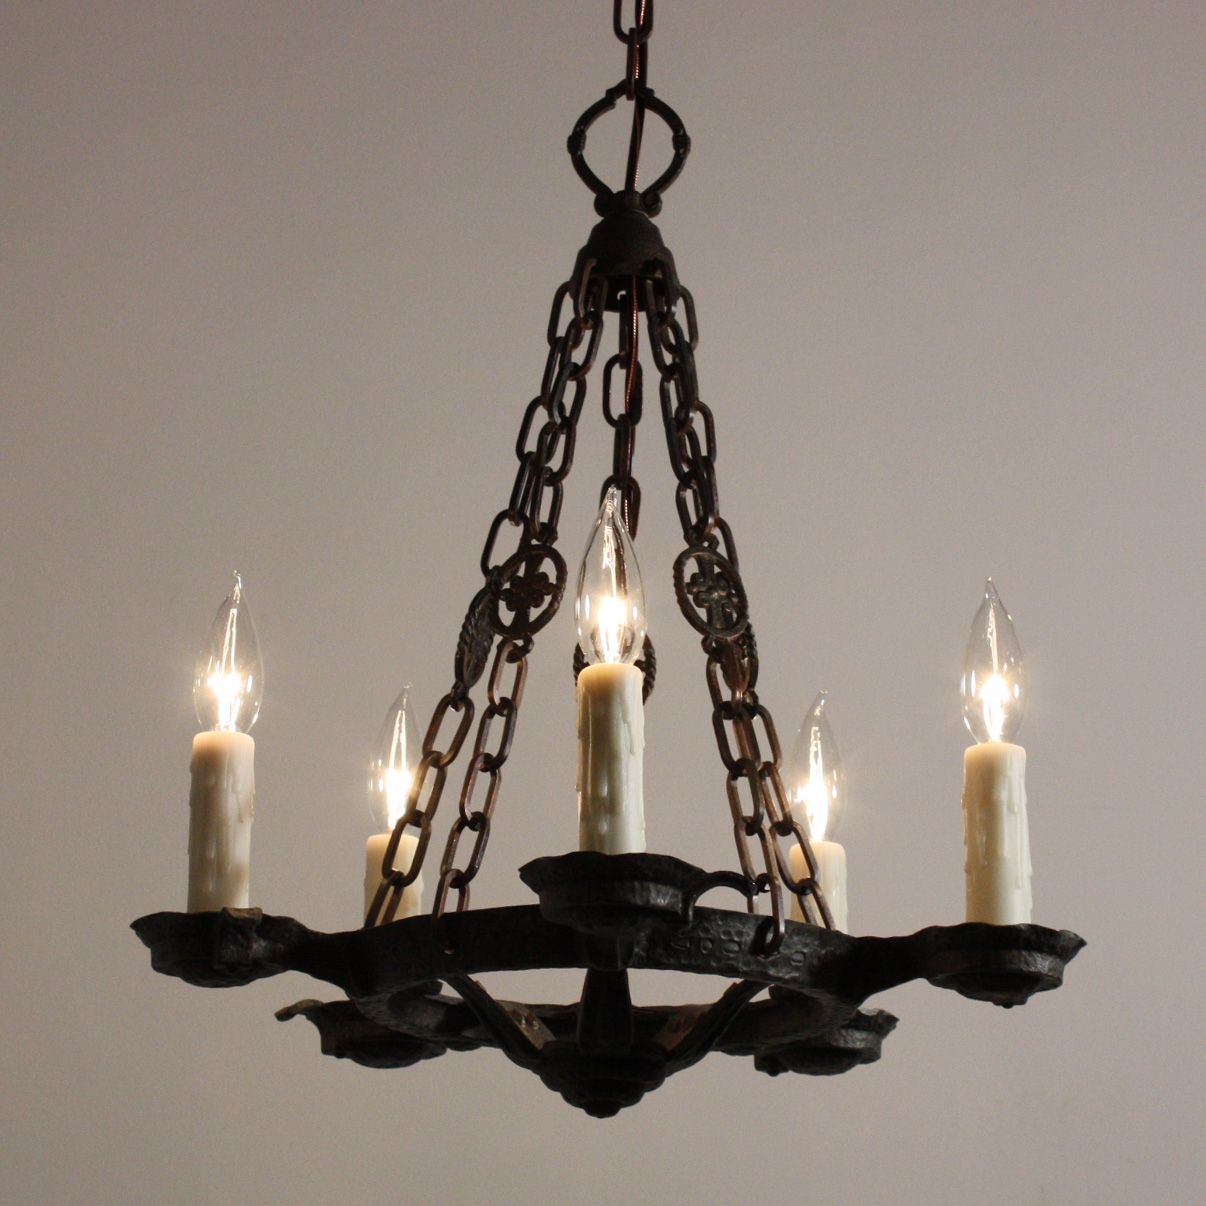 Chandelier Astonishing Cast Iron Chandelier Wrought Iron Crystal Pertaining To Cast Iron Antique Chandelier (View 3 of 12)